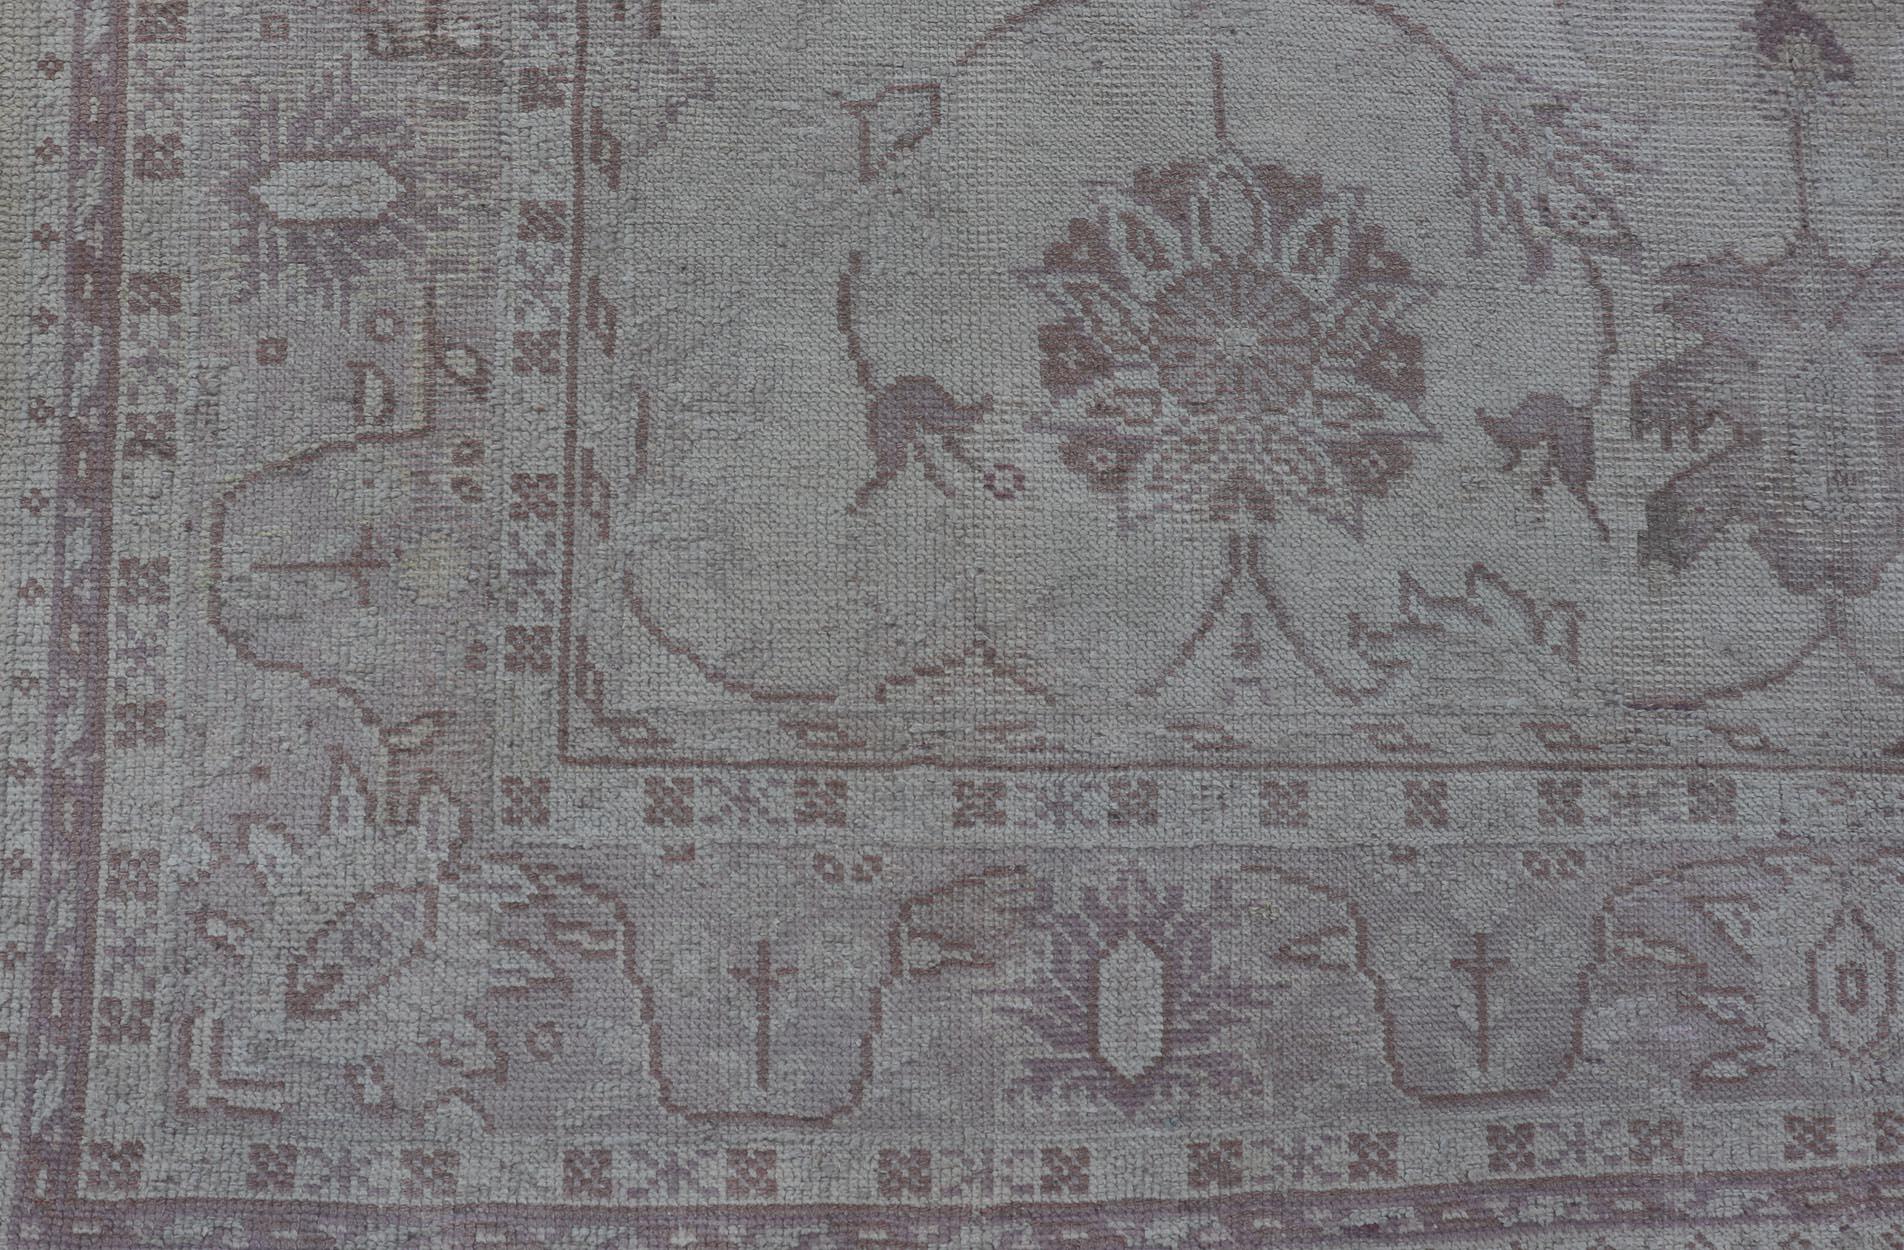 Antique Turkish Oushak Rug with Floral Patterns in Cream and Neutral Colors  For Sale 4